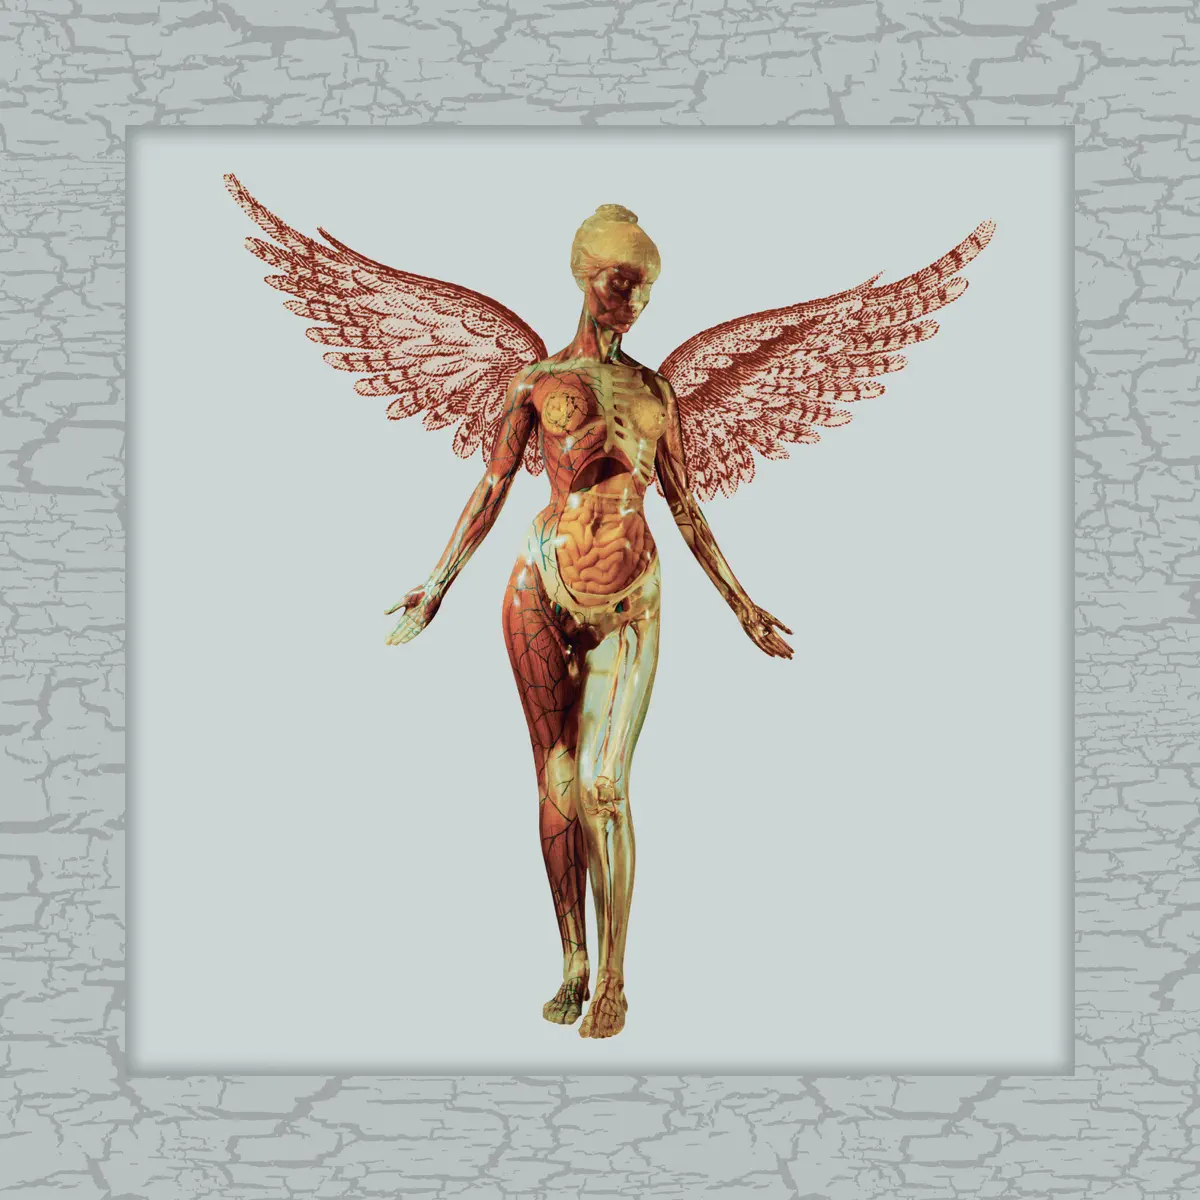 Nirvana - In Utero (30th Anniversary Super Deluxe) [2023 Remaster] (2023) [iTunes Plus AAC M4A]-新房子